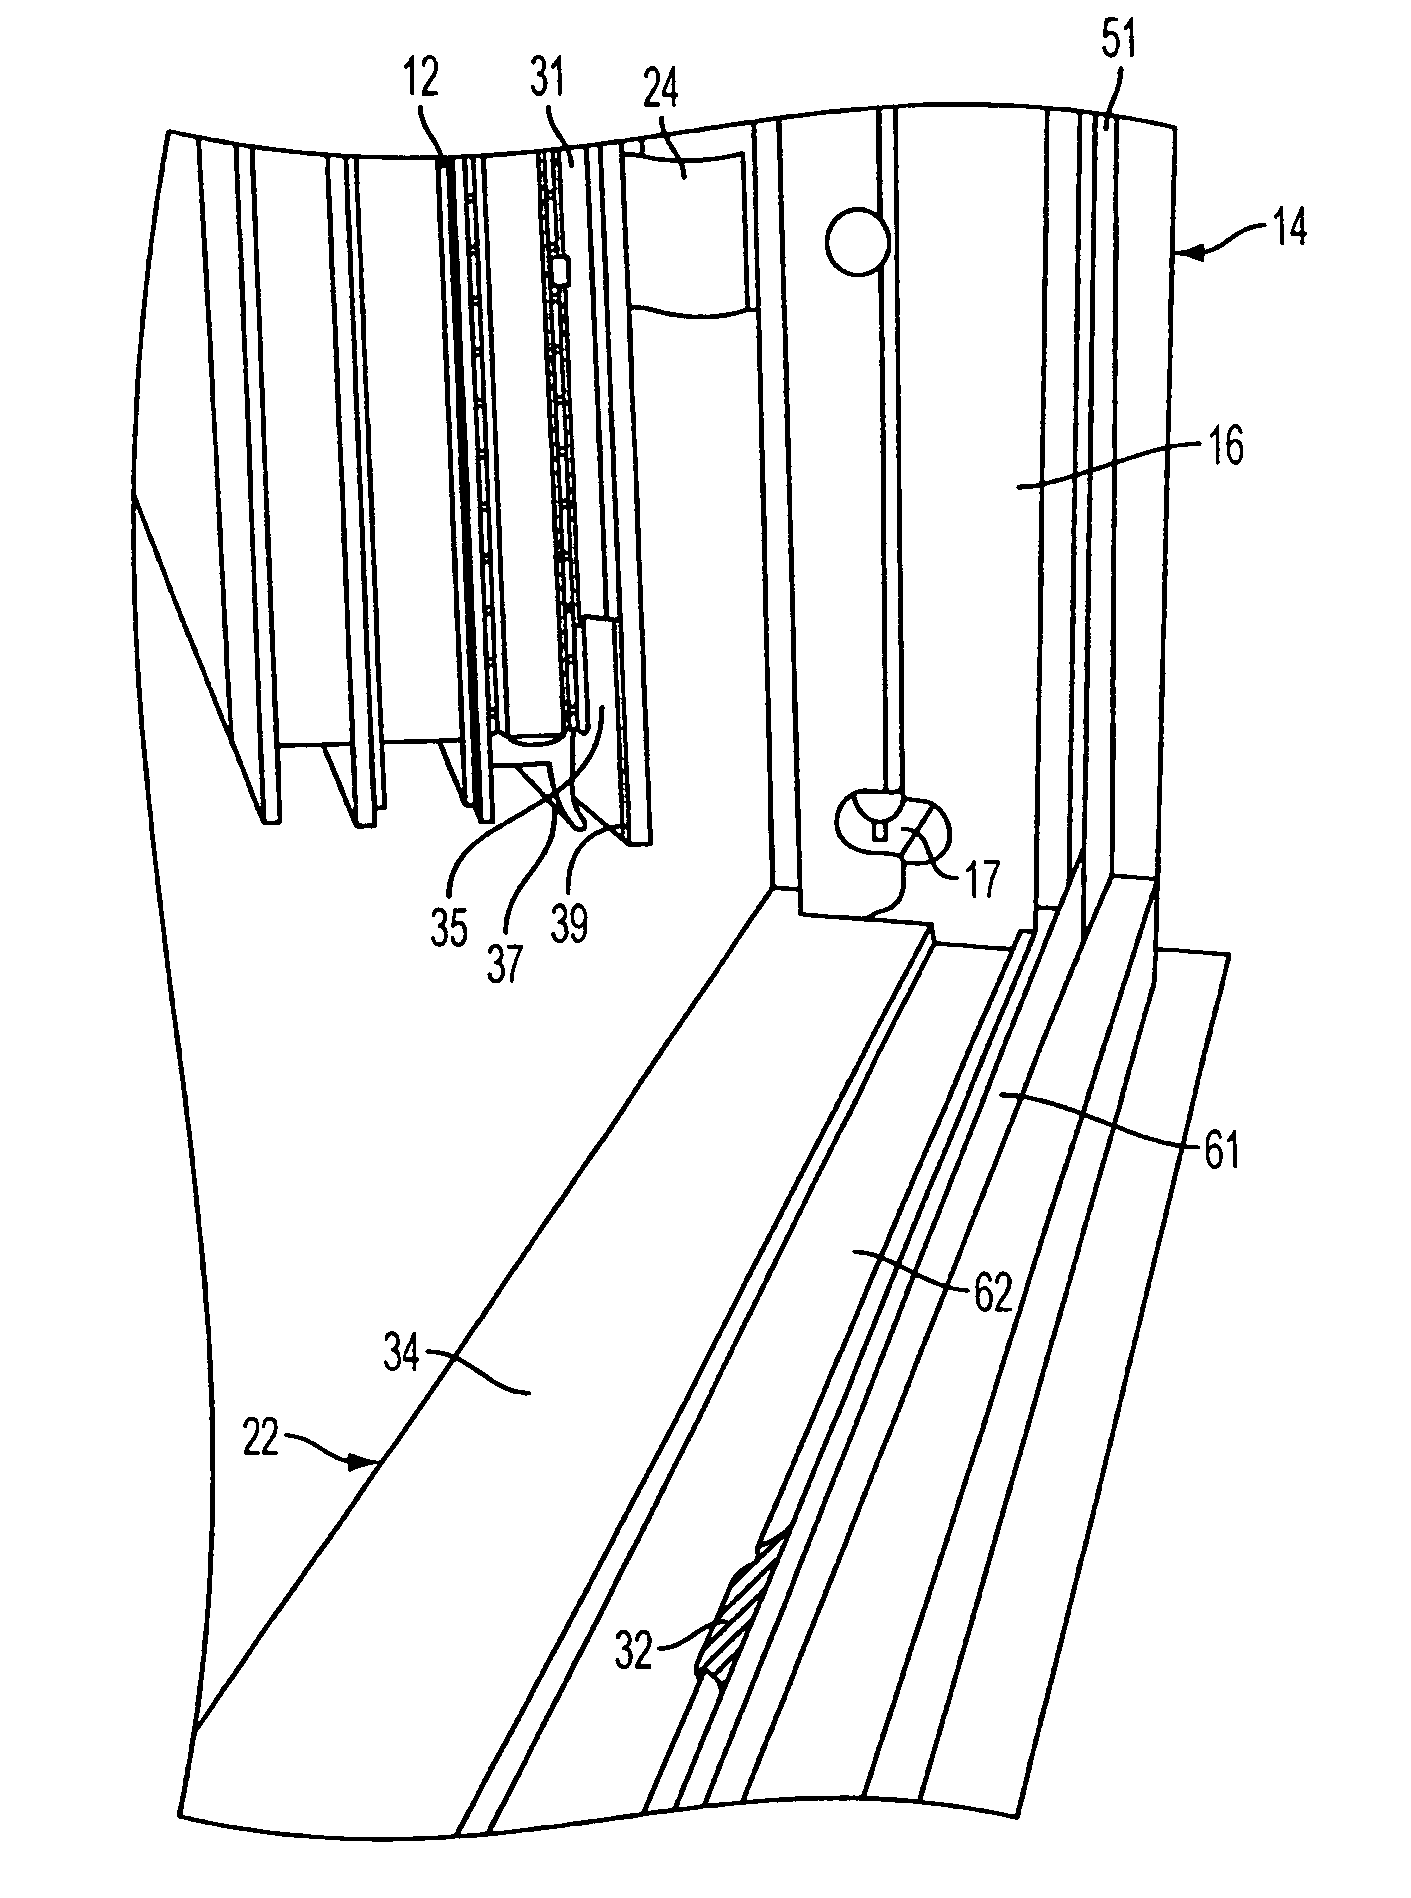 Method of and system for sealing an entry